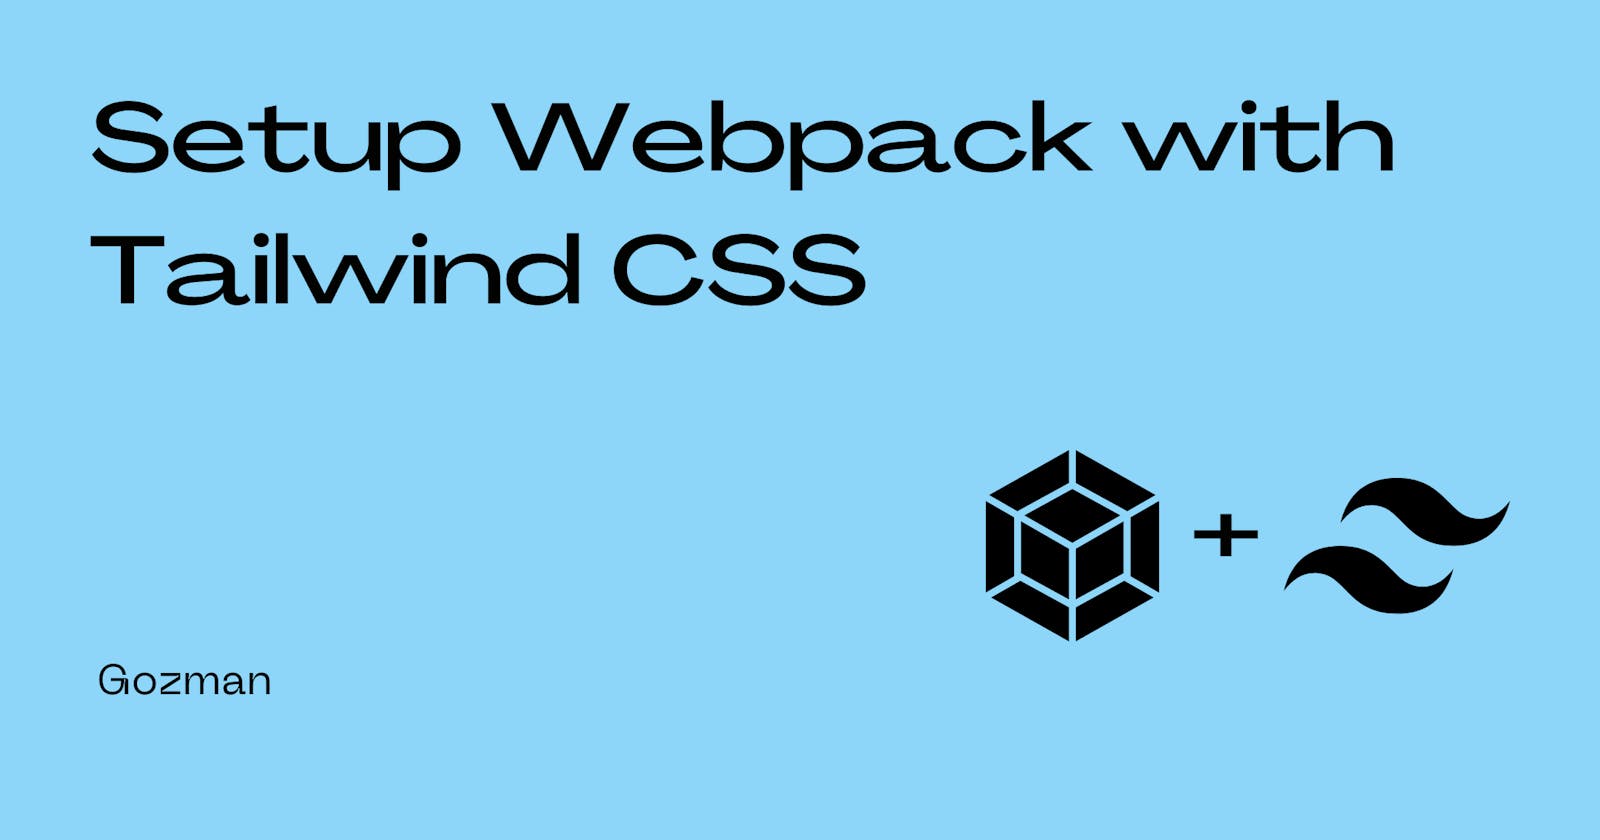 How to Setup Webpack with Tailwind CSS